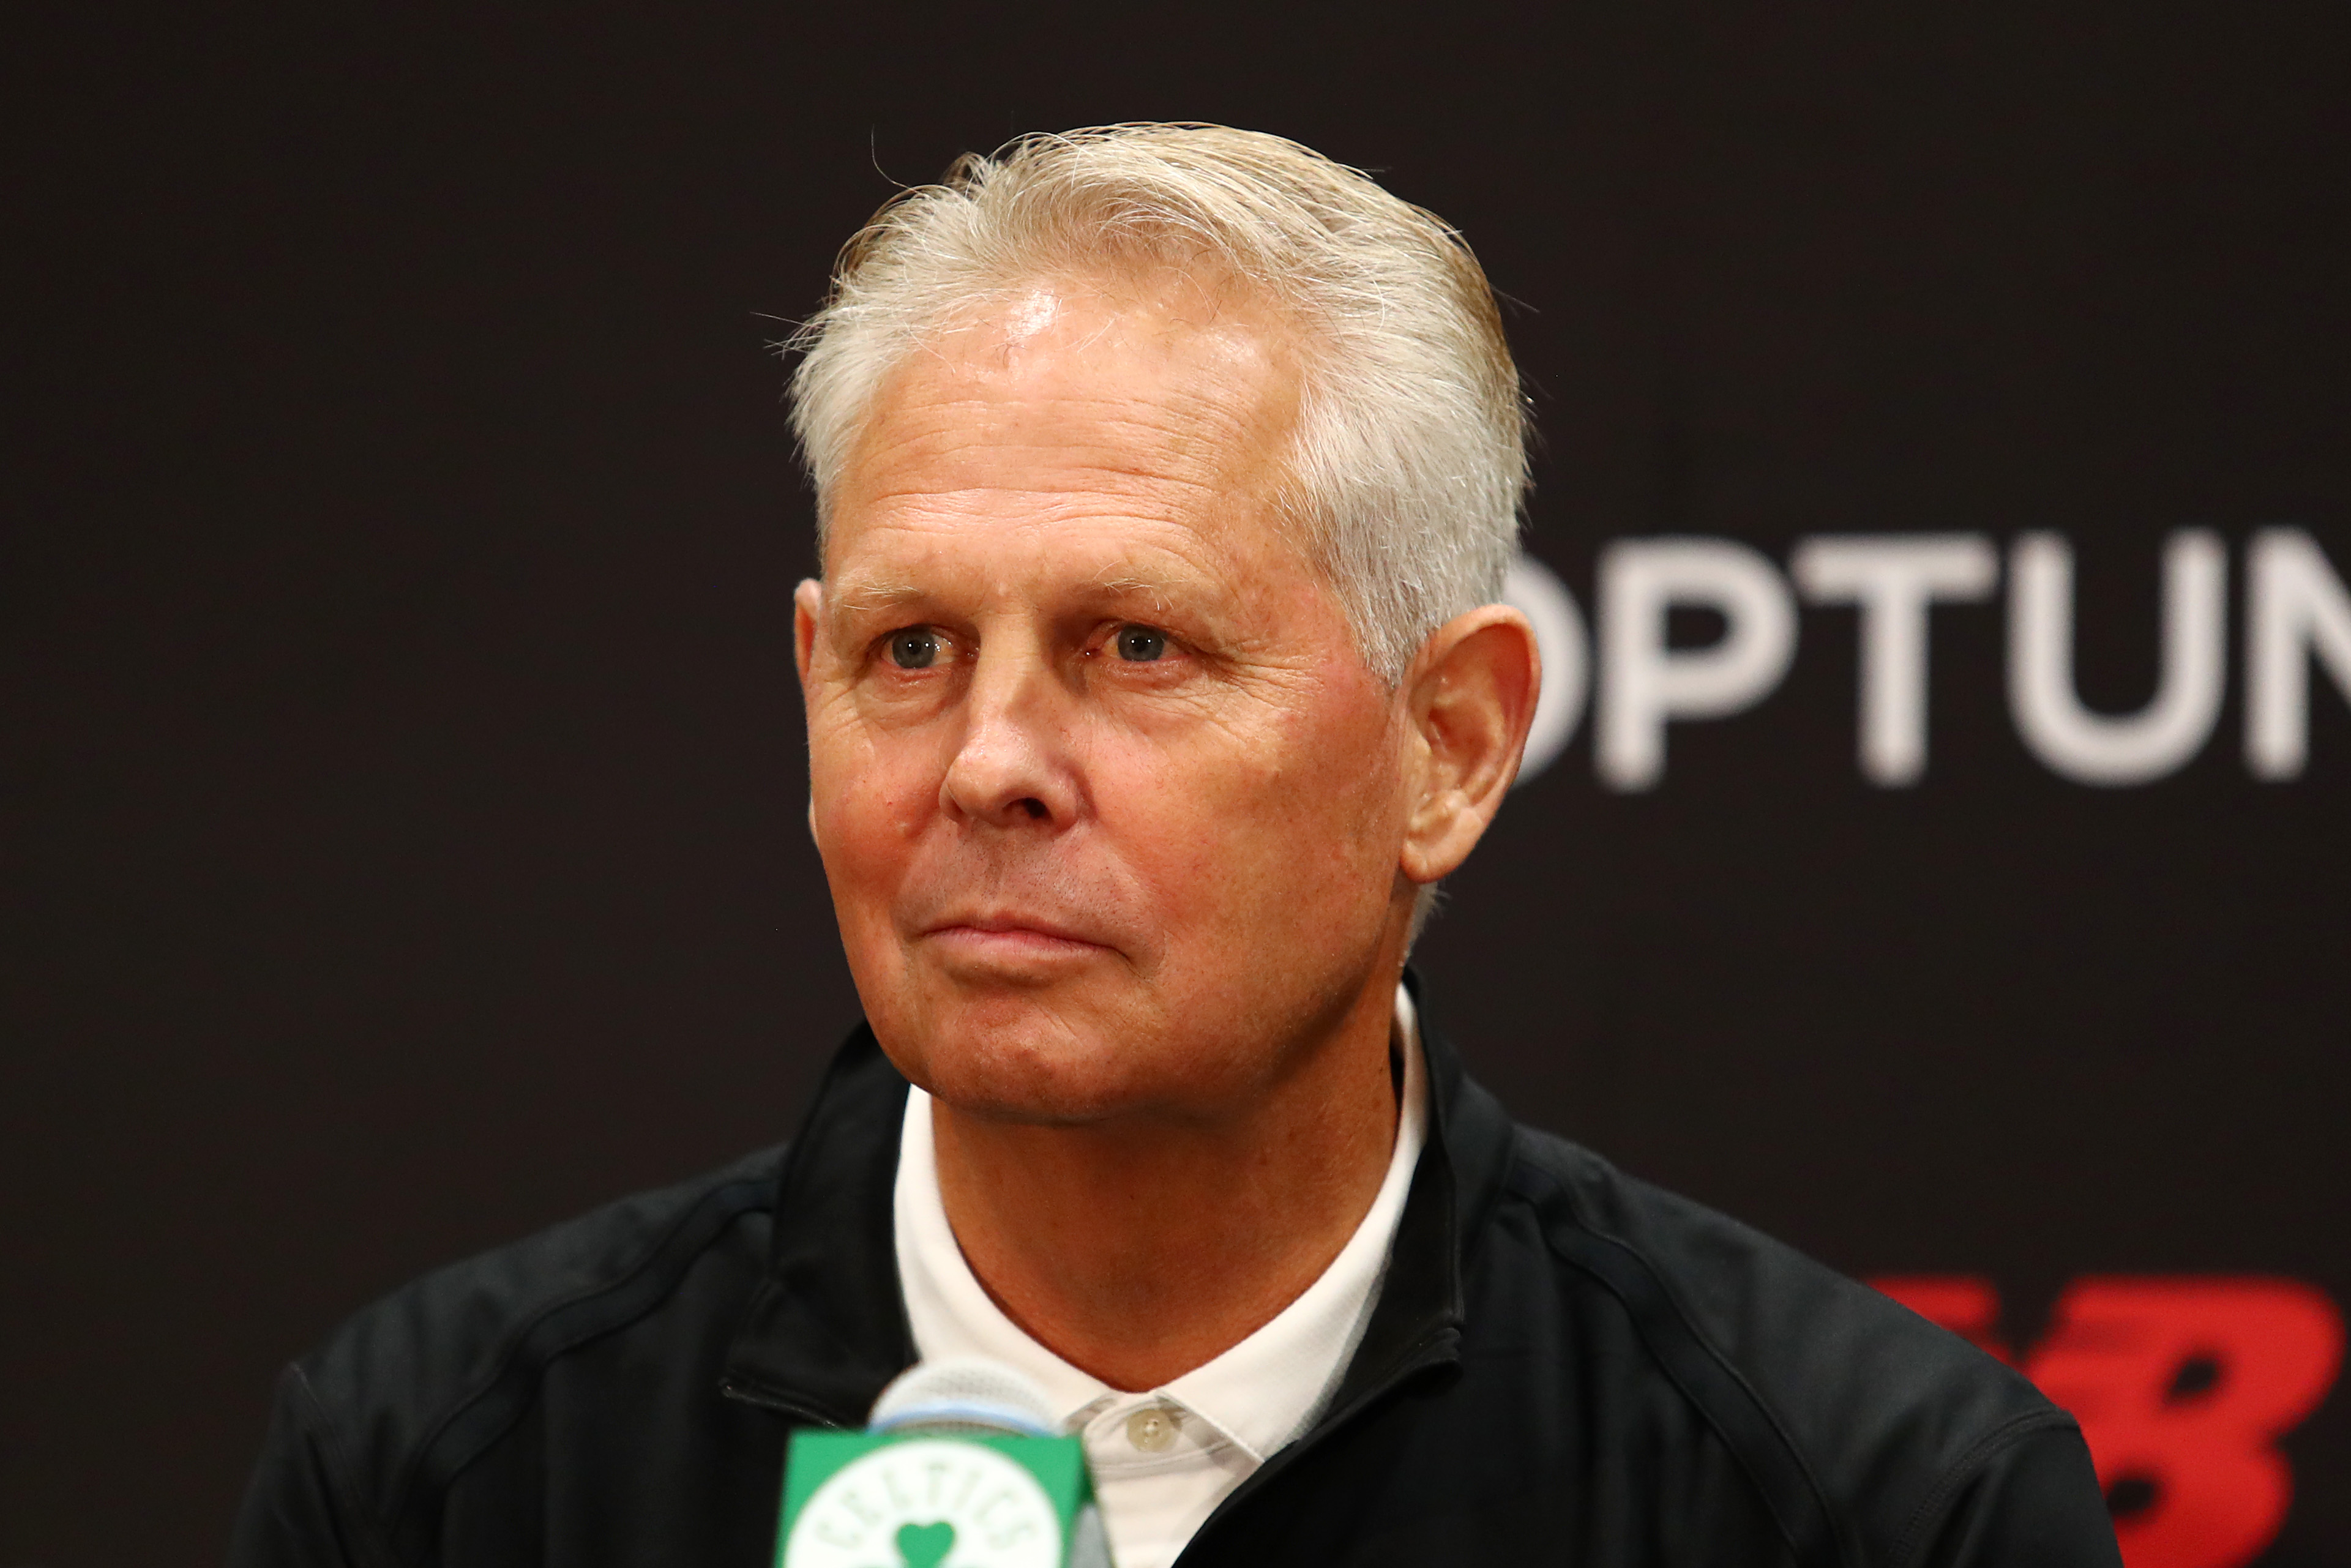 Danny Ainge may have made his worst career move with the Boston Celtics by doing nothing.